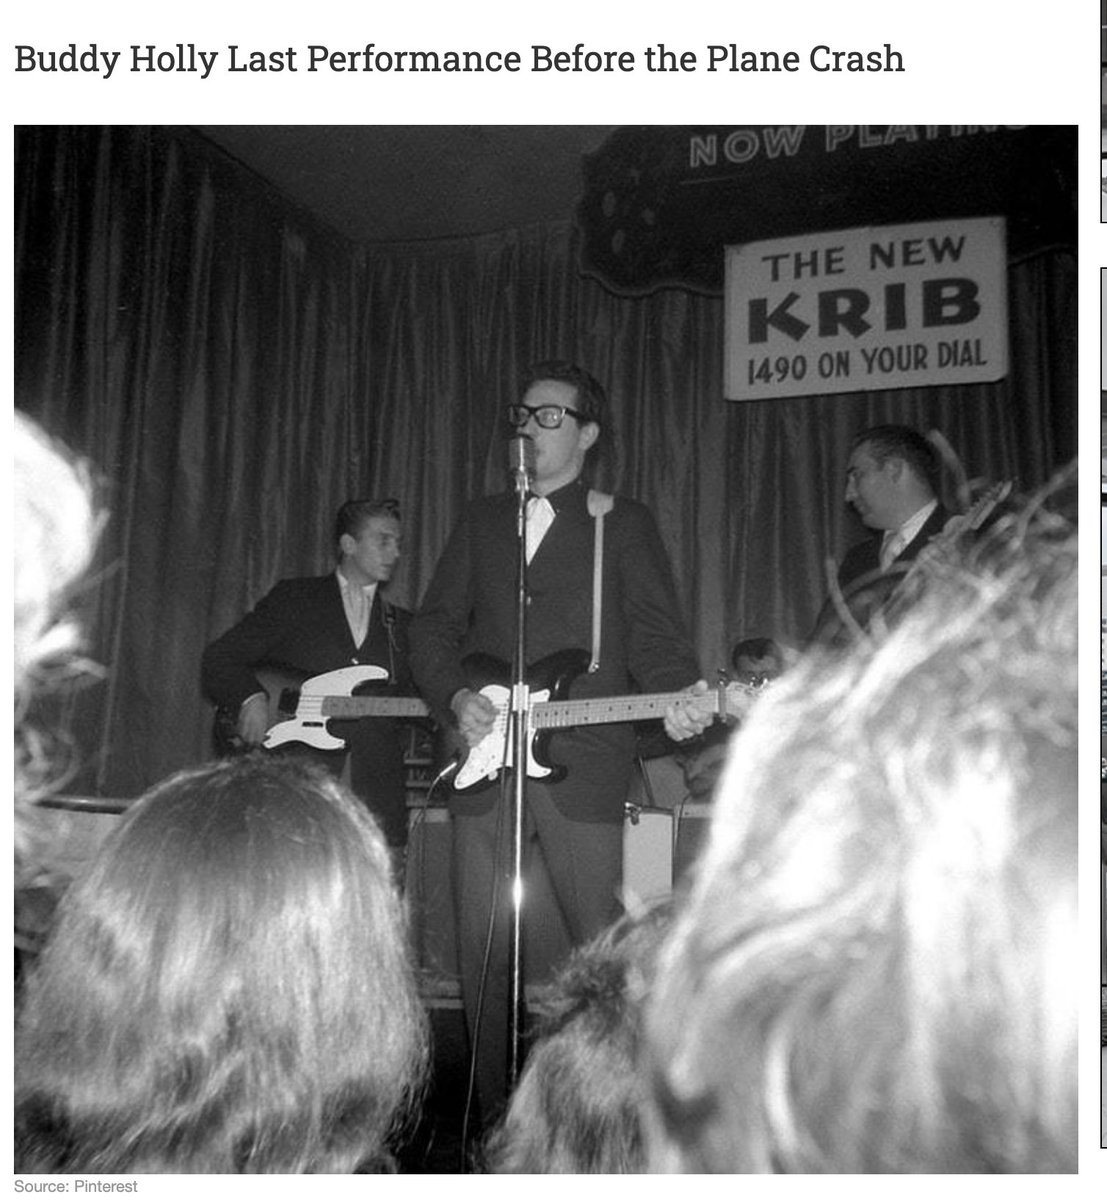 Feb. 3rd, 1959. The plane went down but the music LIVES on! #buddyholly #rockandroll #ritchievalens #thebigbopper